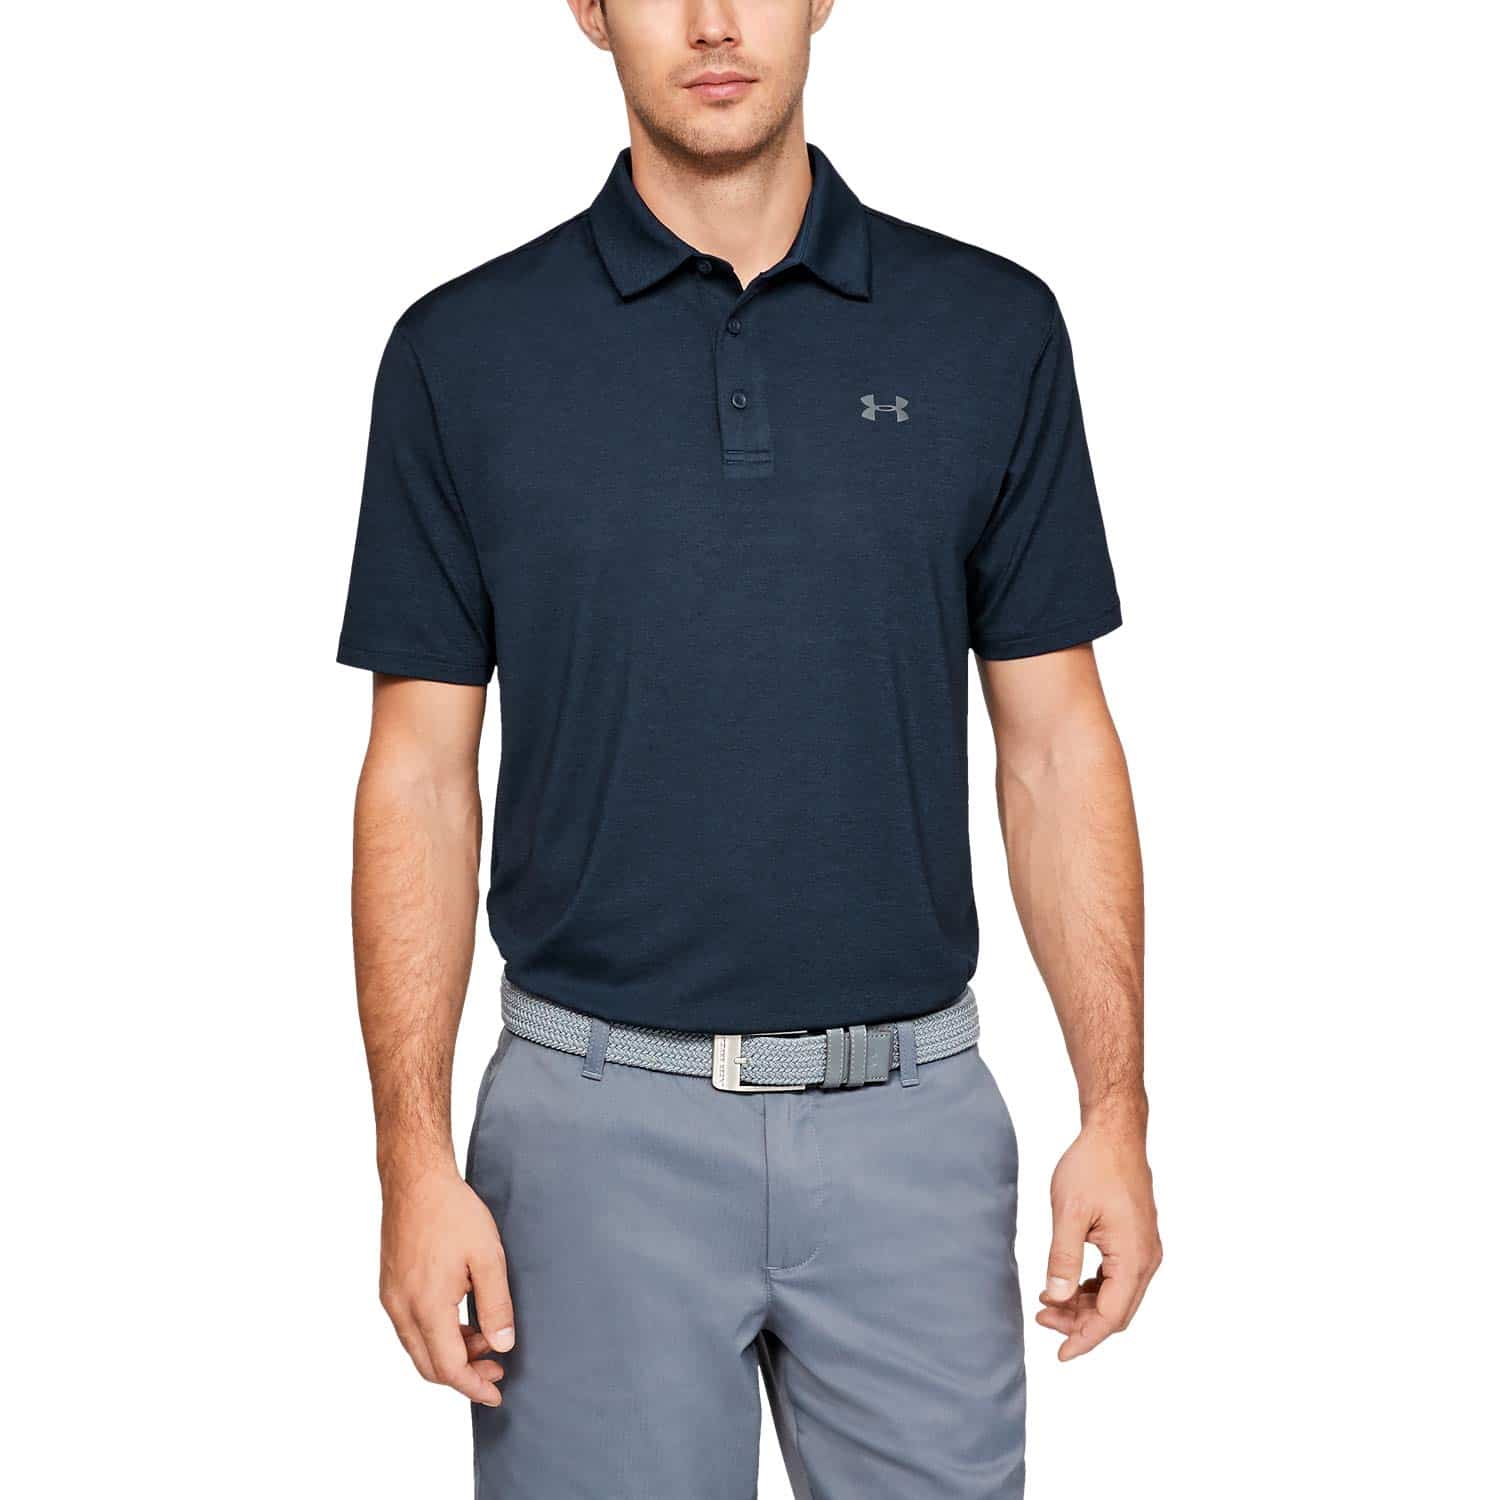 Top 15 Best Golf Shirts for Men In 2022 Reviews Fashion